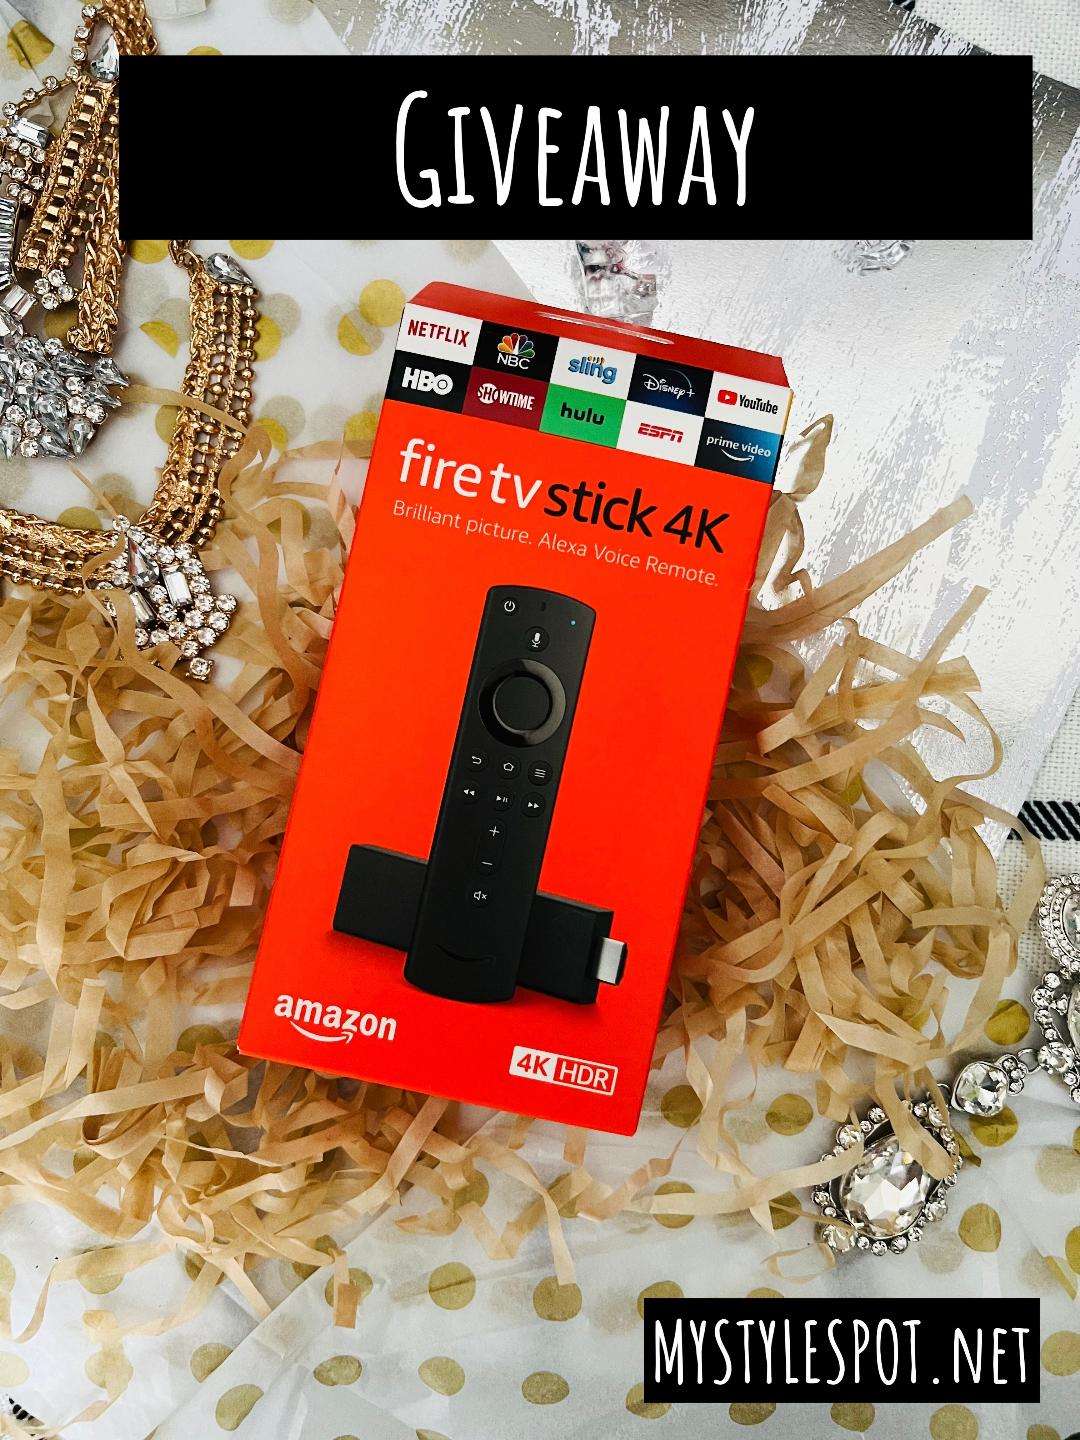 GIVEAWAY: Enter to Win an  Fire TV Stick 4K - MyStyleSpot